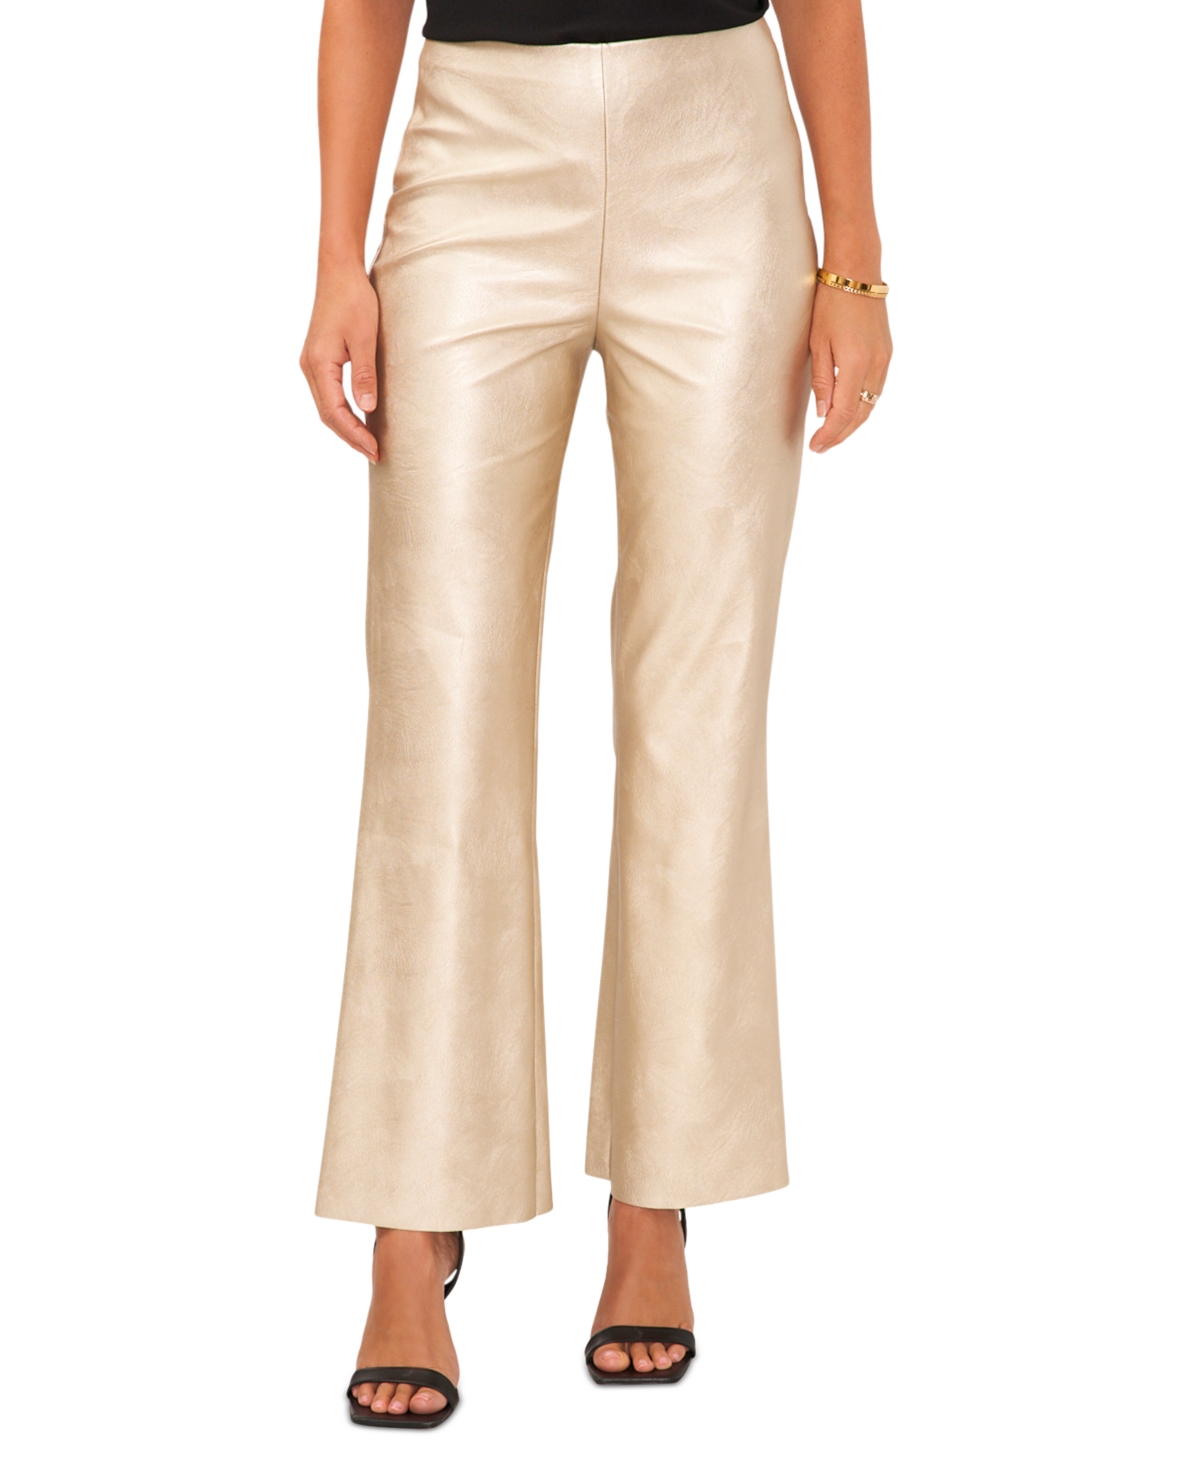 Women's Pull-On Metallic Faux-Leather Flare Pants - Soft Gold